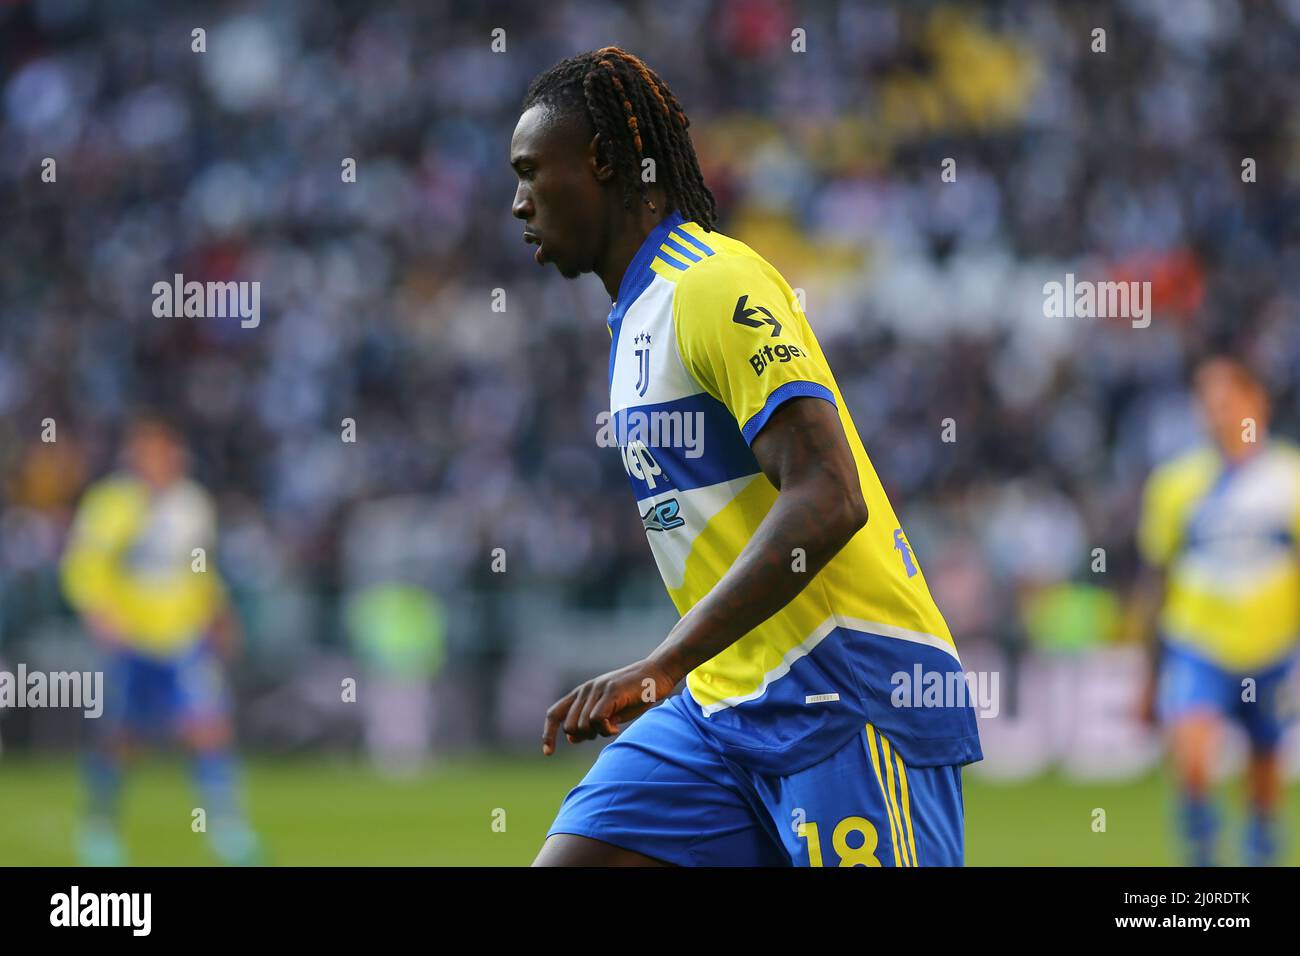 TURIN, ITALY. 20 MARCH 2022. Moise Kean of Juventus FC during the match between Juventus FC and US Salernitana 1919 on March 20, 2022 at Allianz Stadium in Turin, Italy. Credit: Massimiliano Ferraro/Medialys Images/Alamy Live News Stock Photo